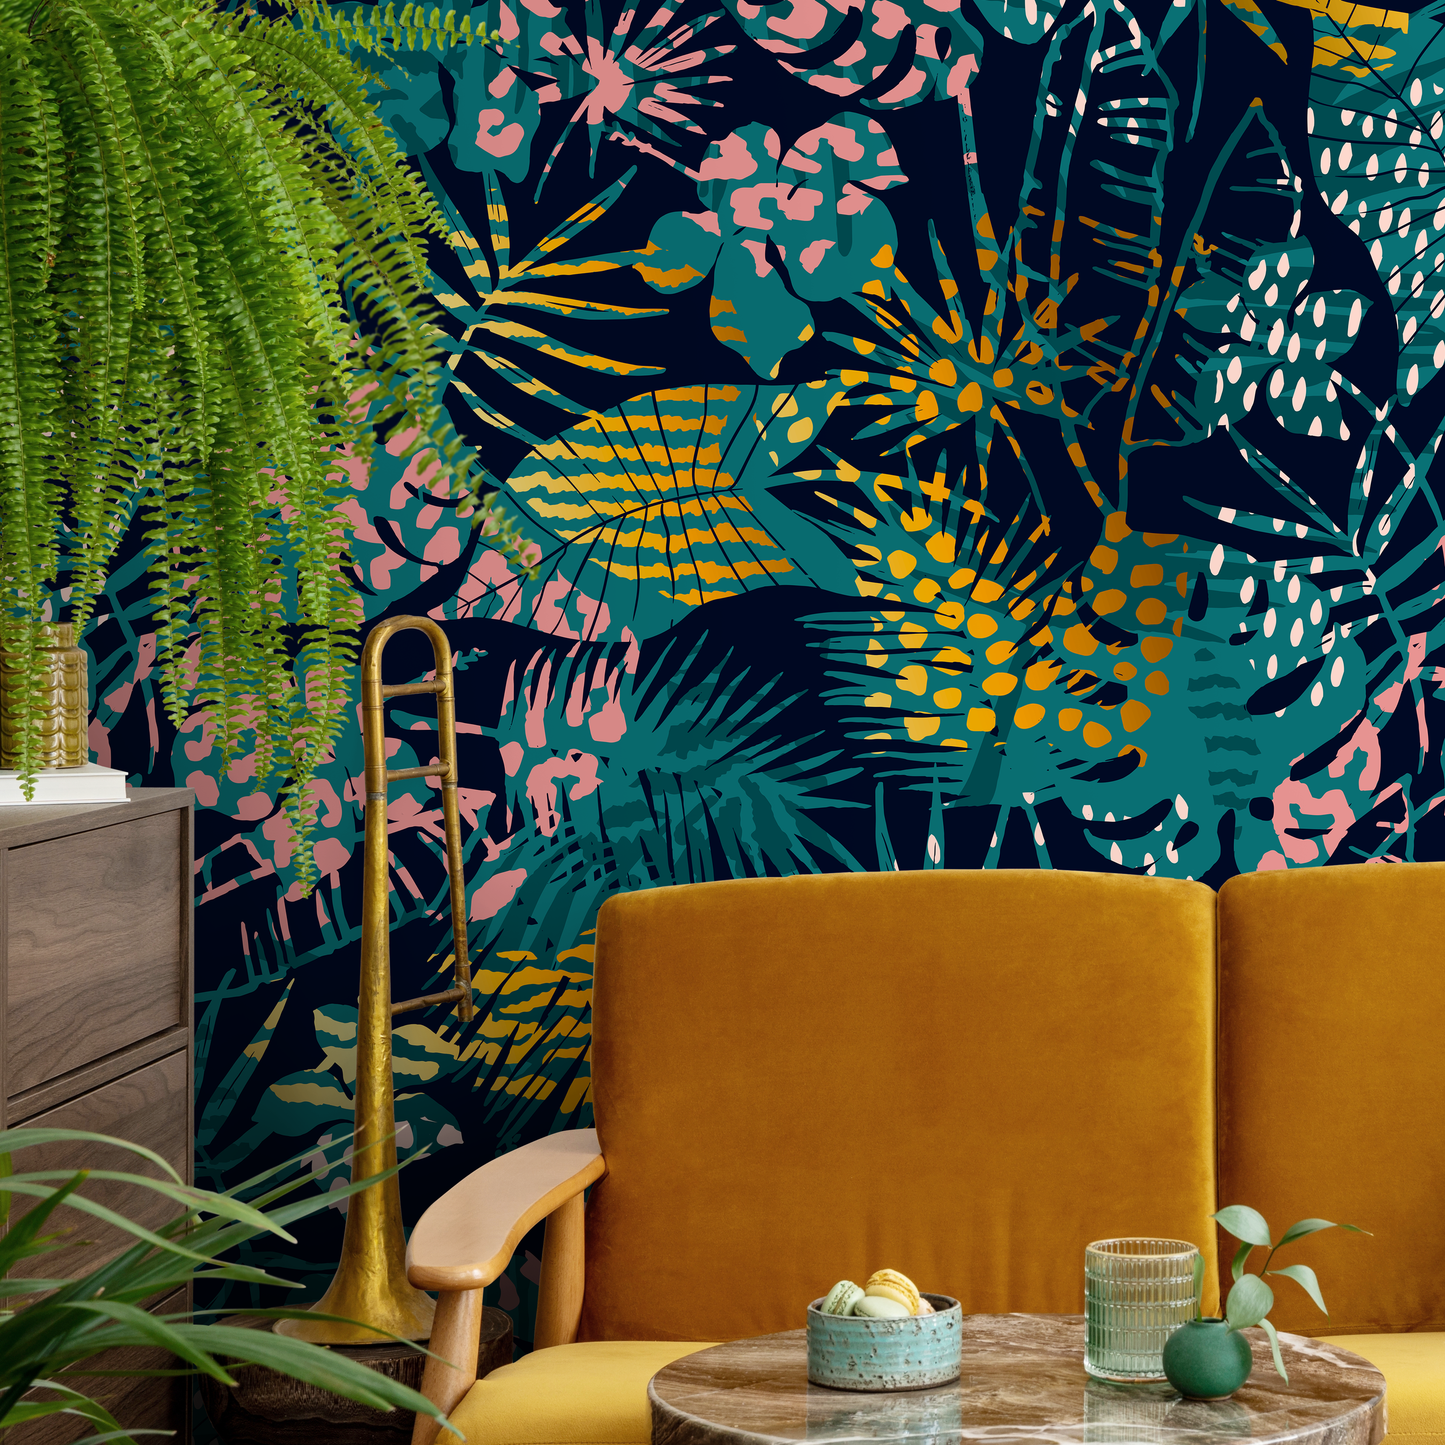 Tropical Multicolor Leaves - Removable Wallpaper Peel and Stick Wallpaper Wall Paper Wall Mural - A782